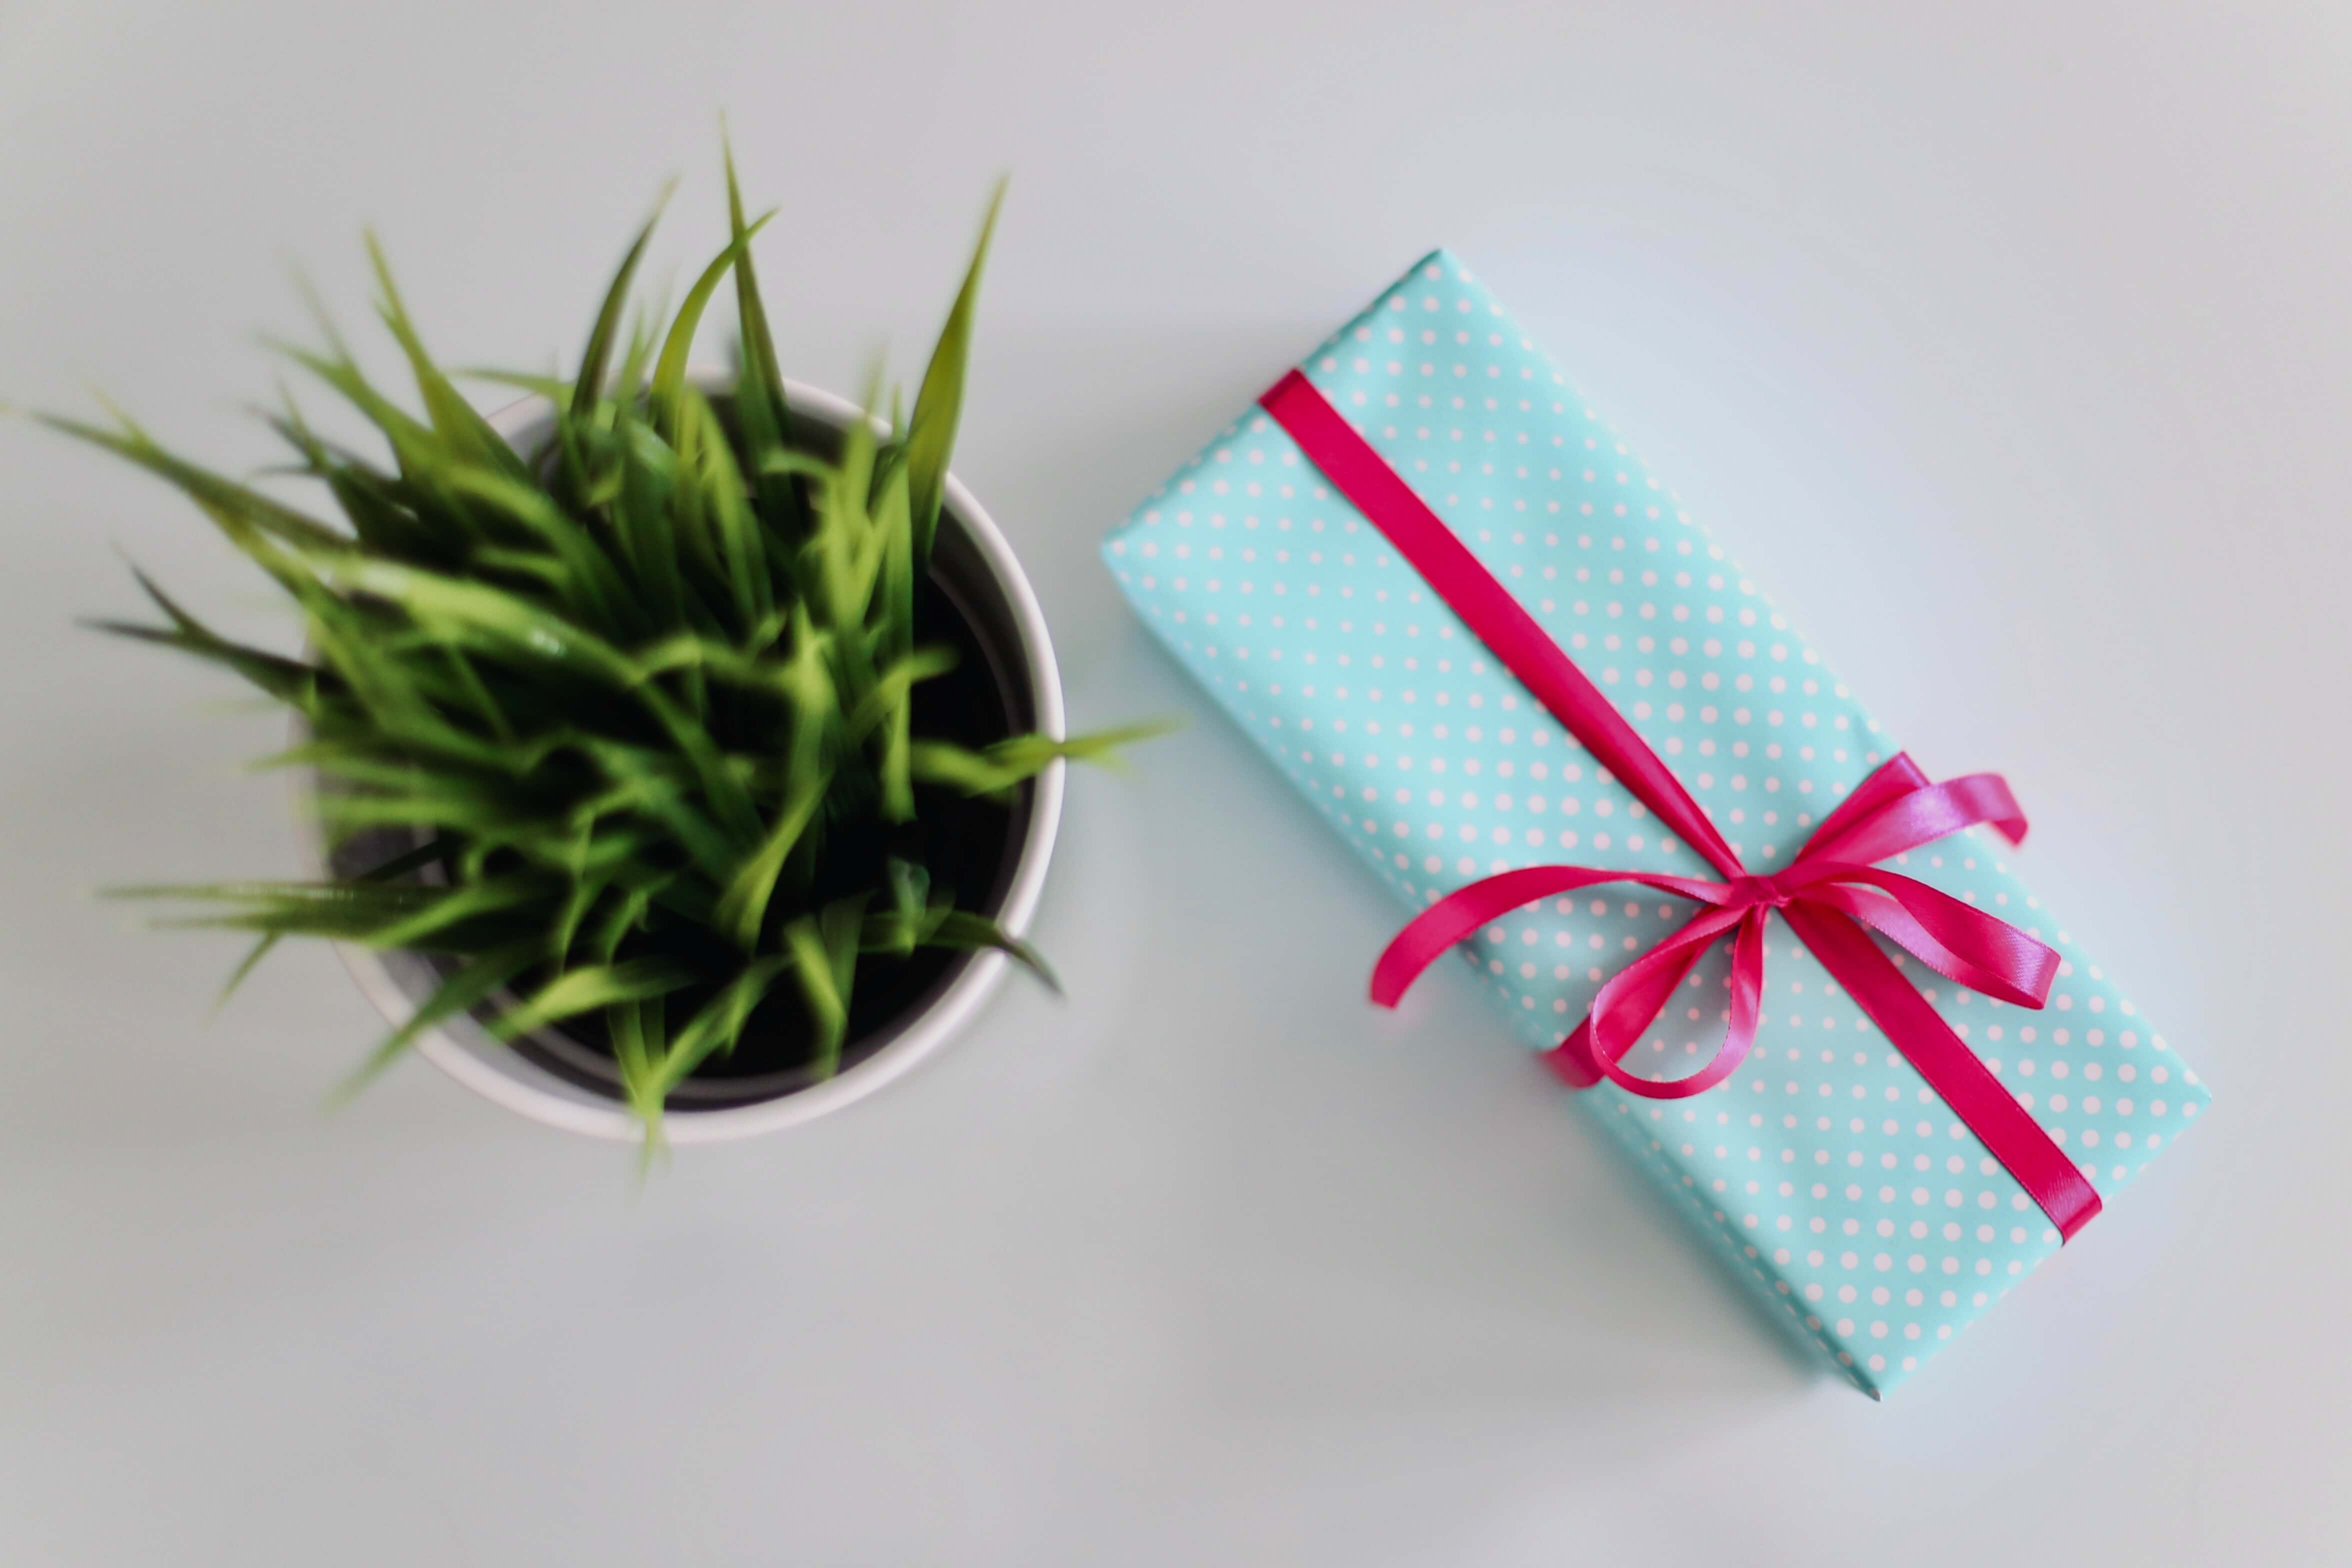 A blue gift box and a potted plant